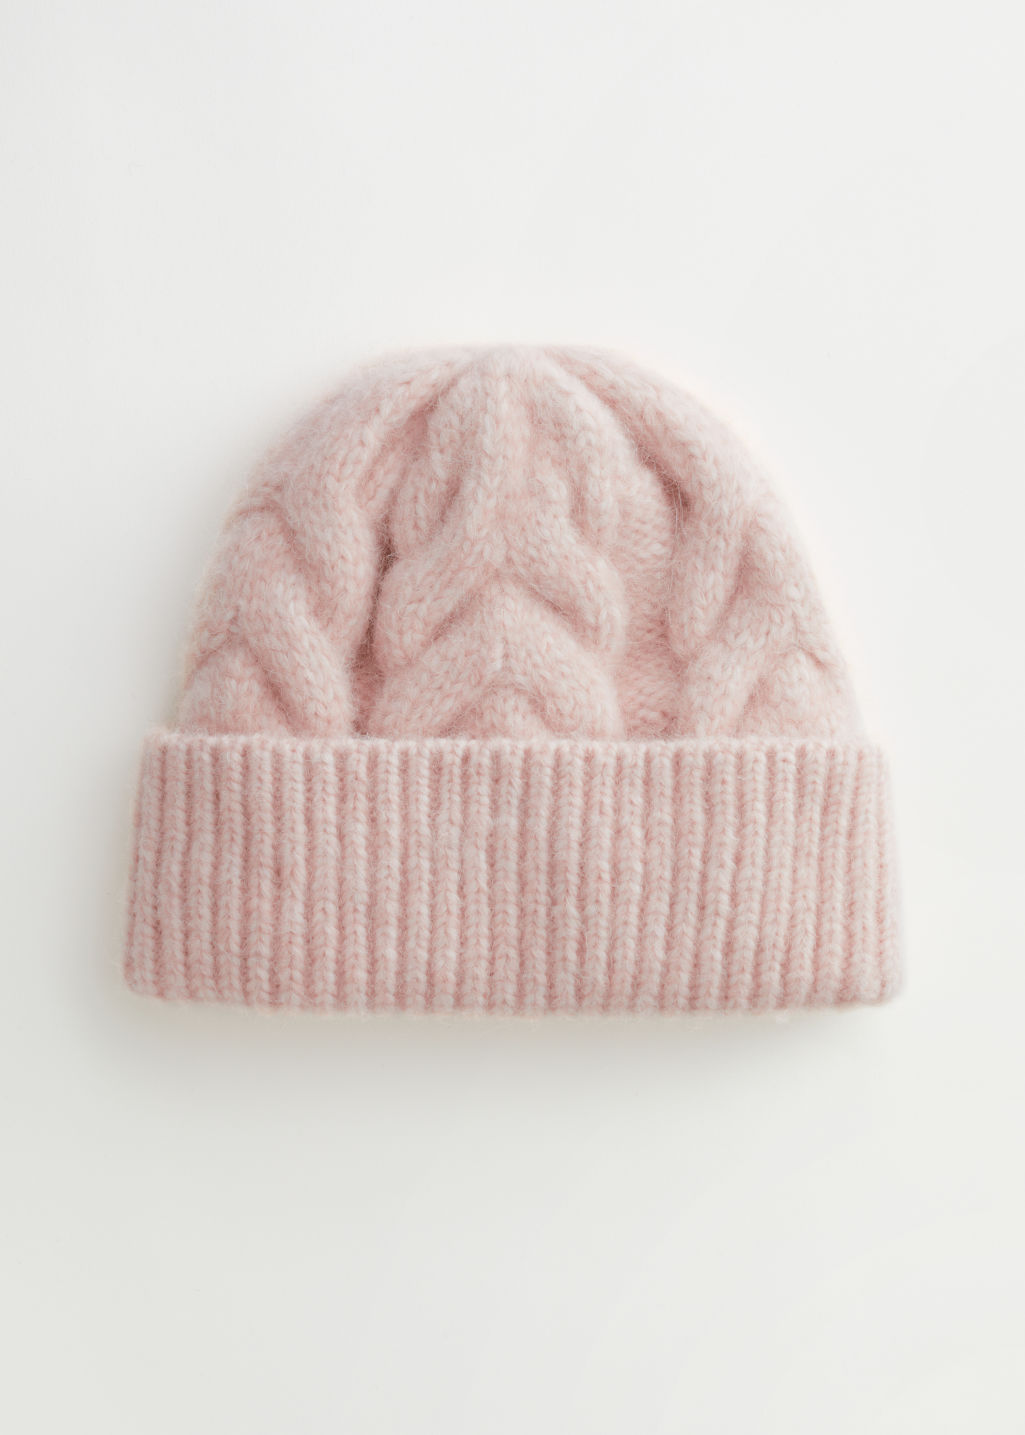 Chunky Braid Knit Beanie - Pink - Beanies - & Other Stories